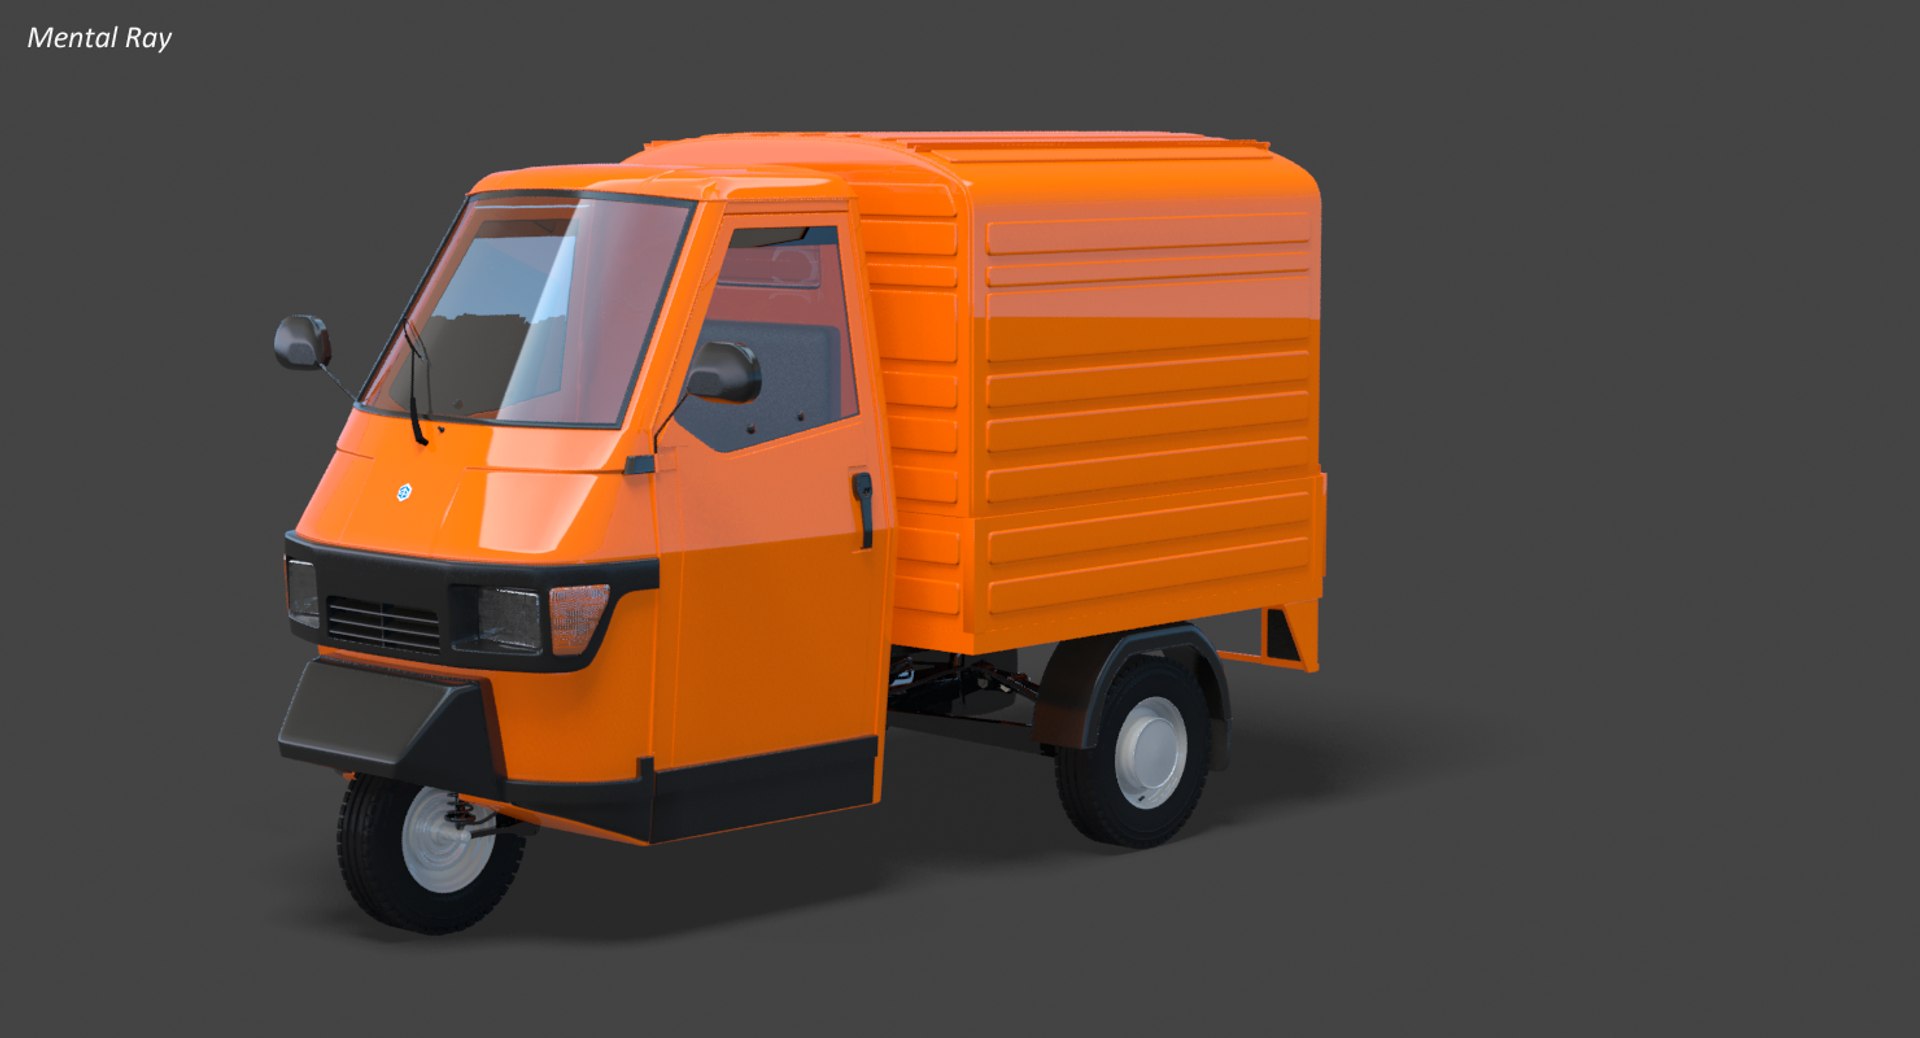 1996 Piaggio Ape 50, A scooter based delivery truck with a …